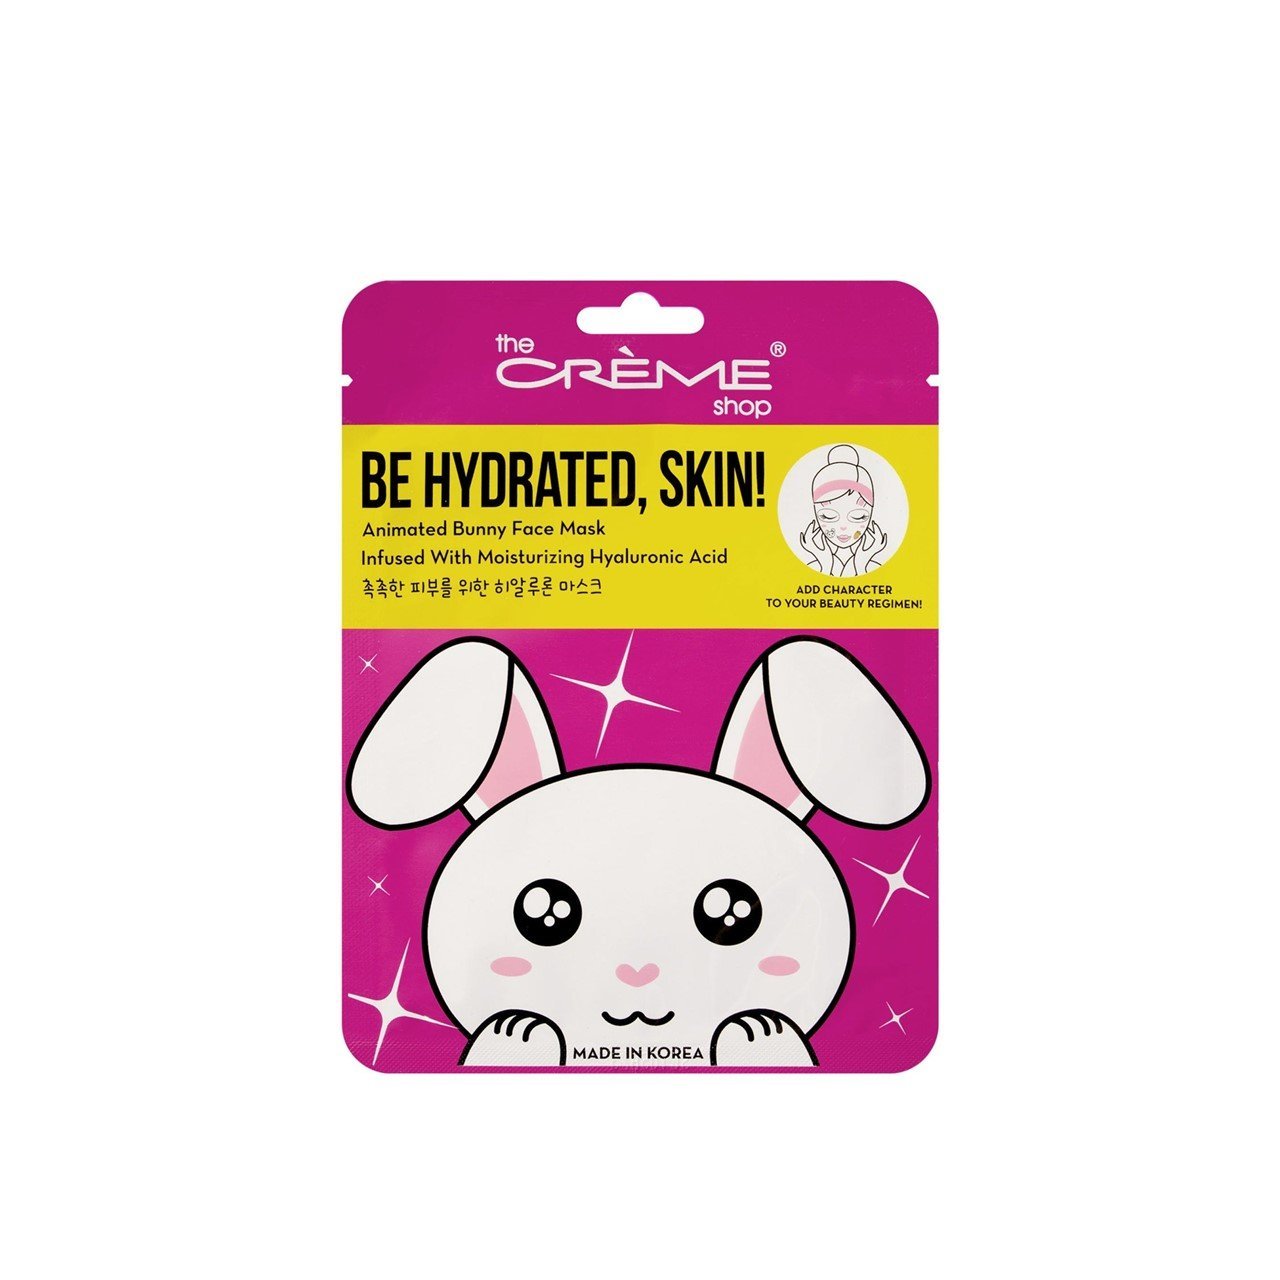 The Crème Shop Be Hydrated, Skin! Animated Bunny Face Mask 25g